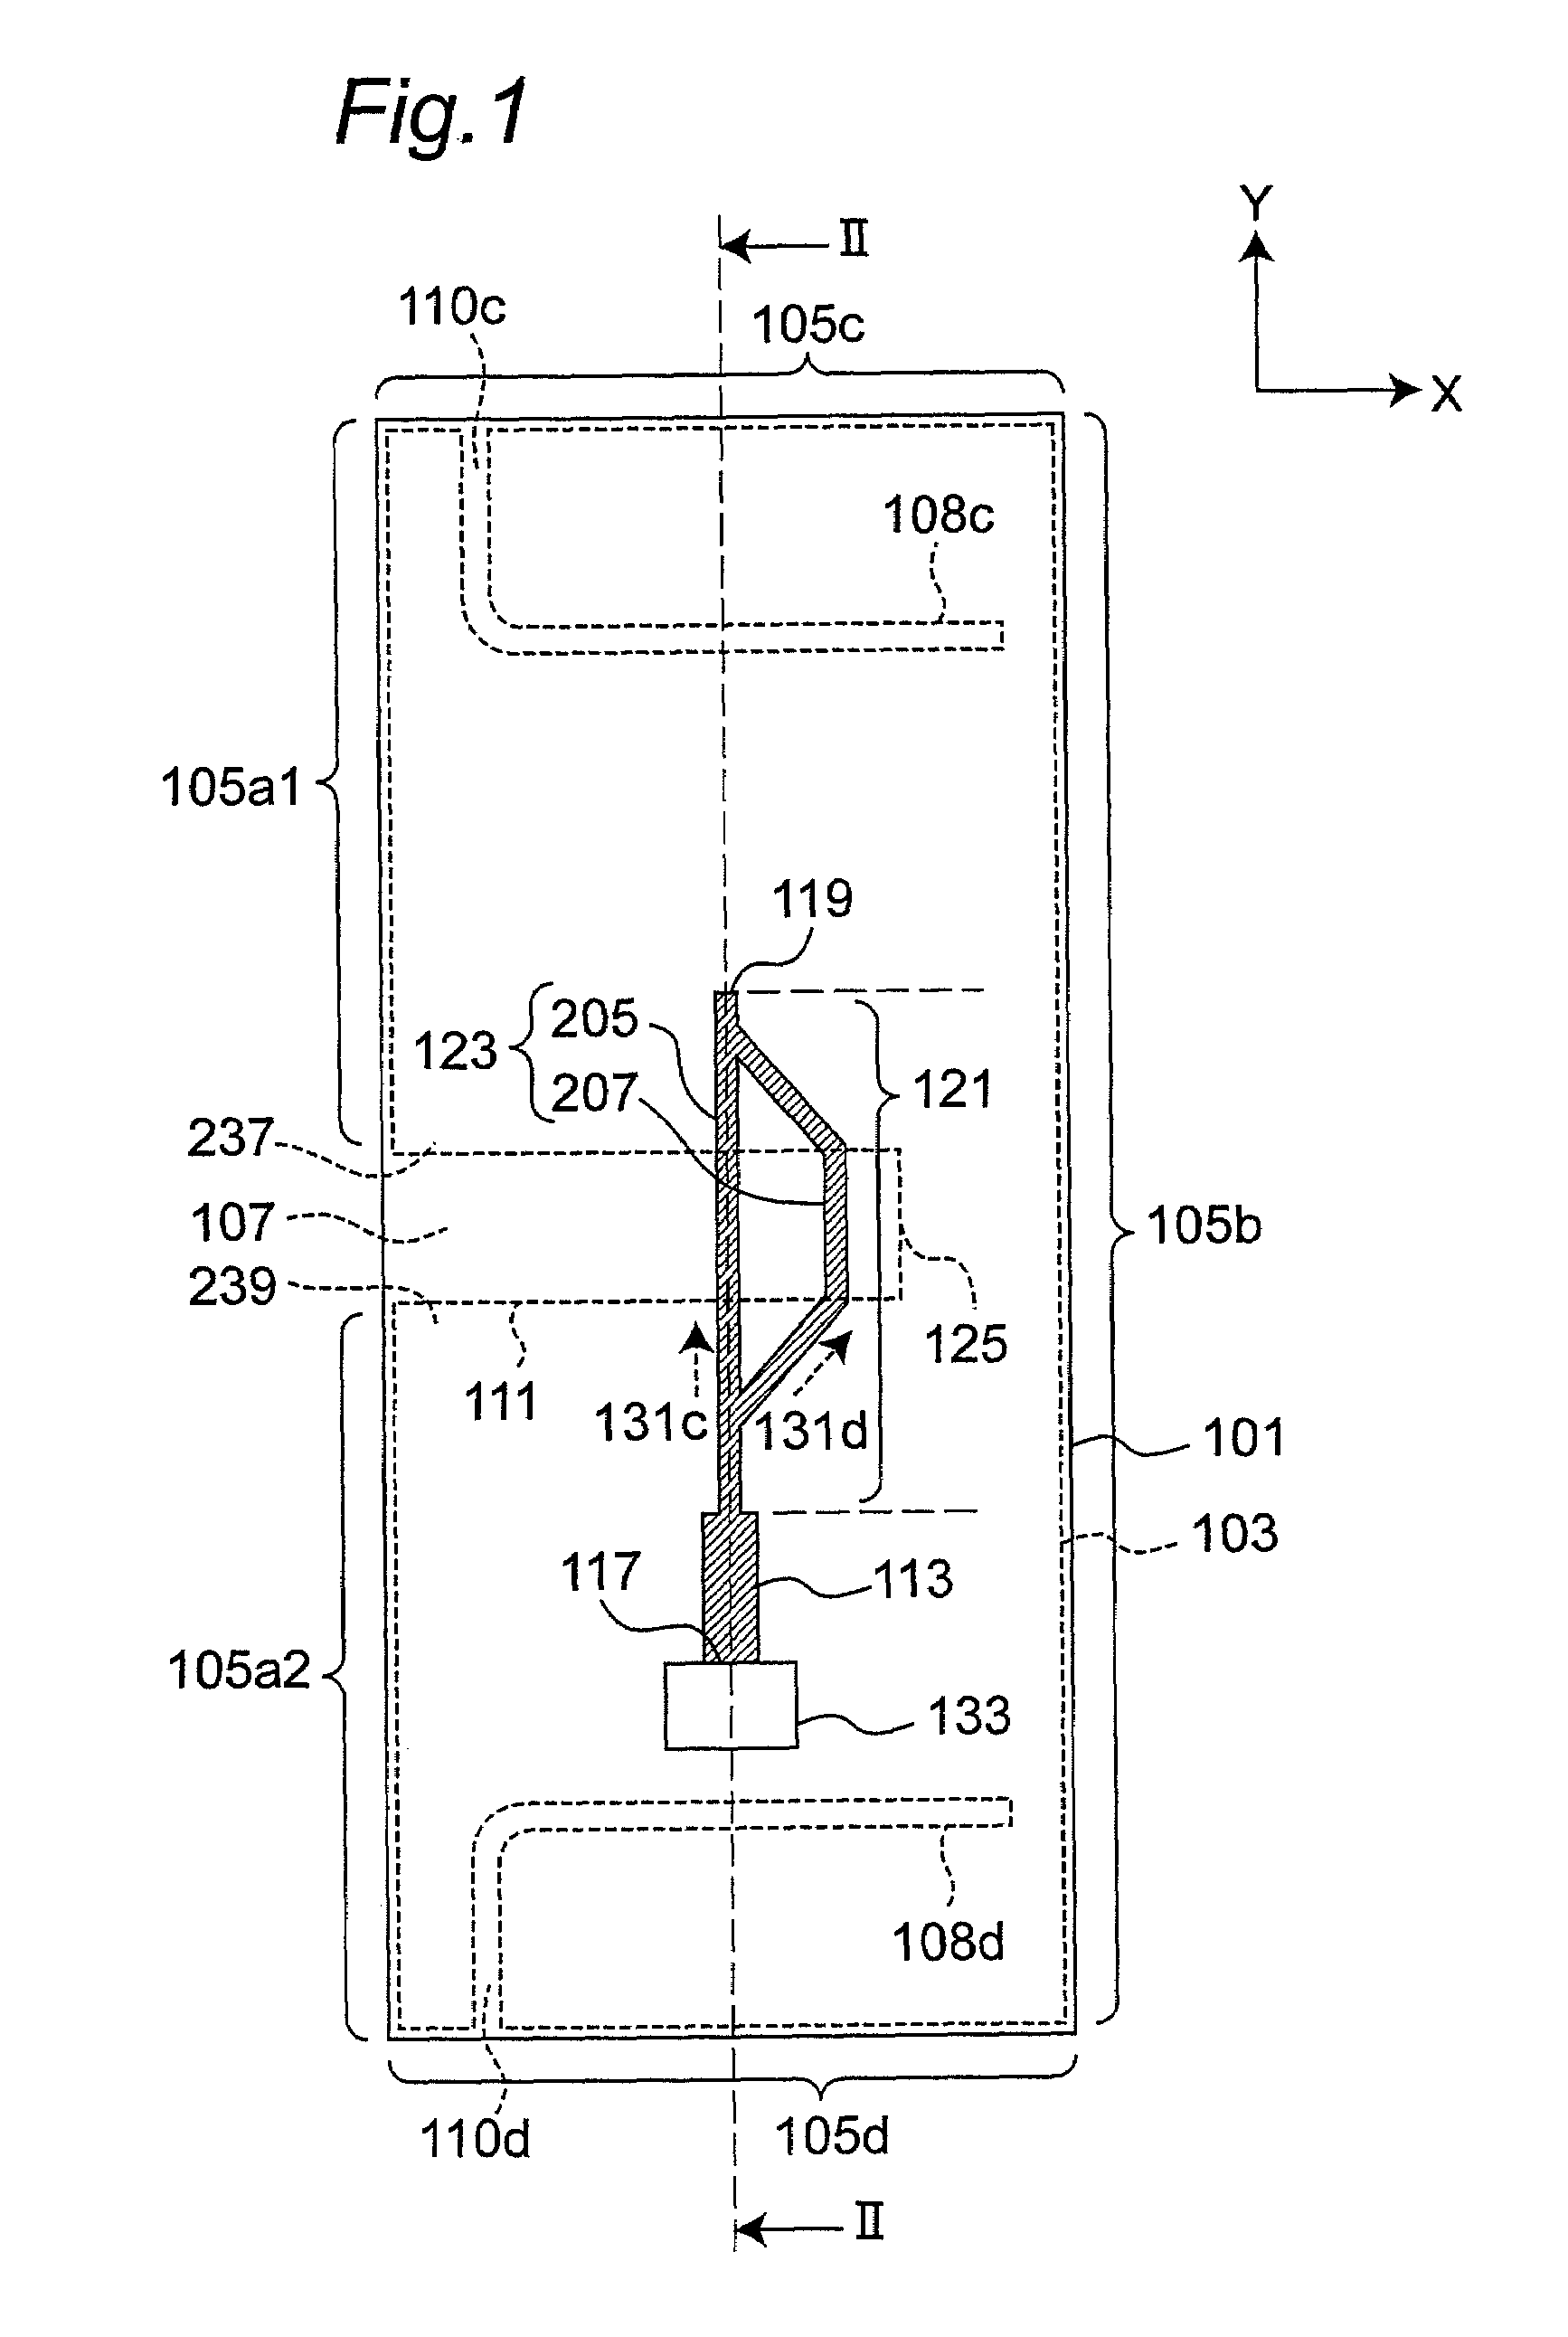 Wide-band slot antenna apparatus with stop band